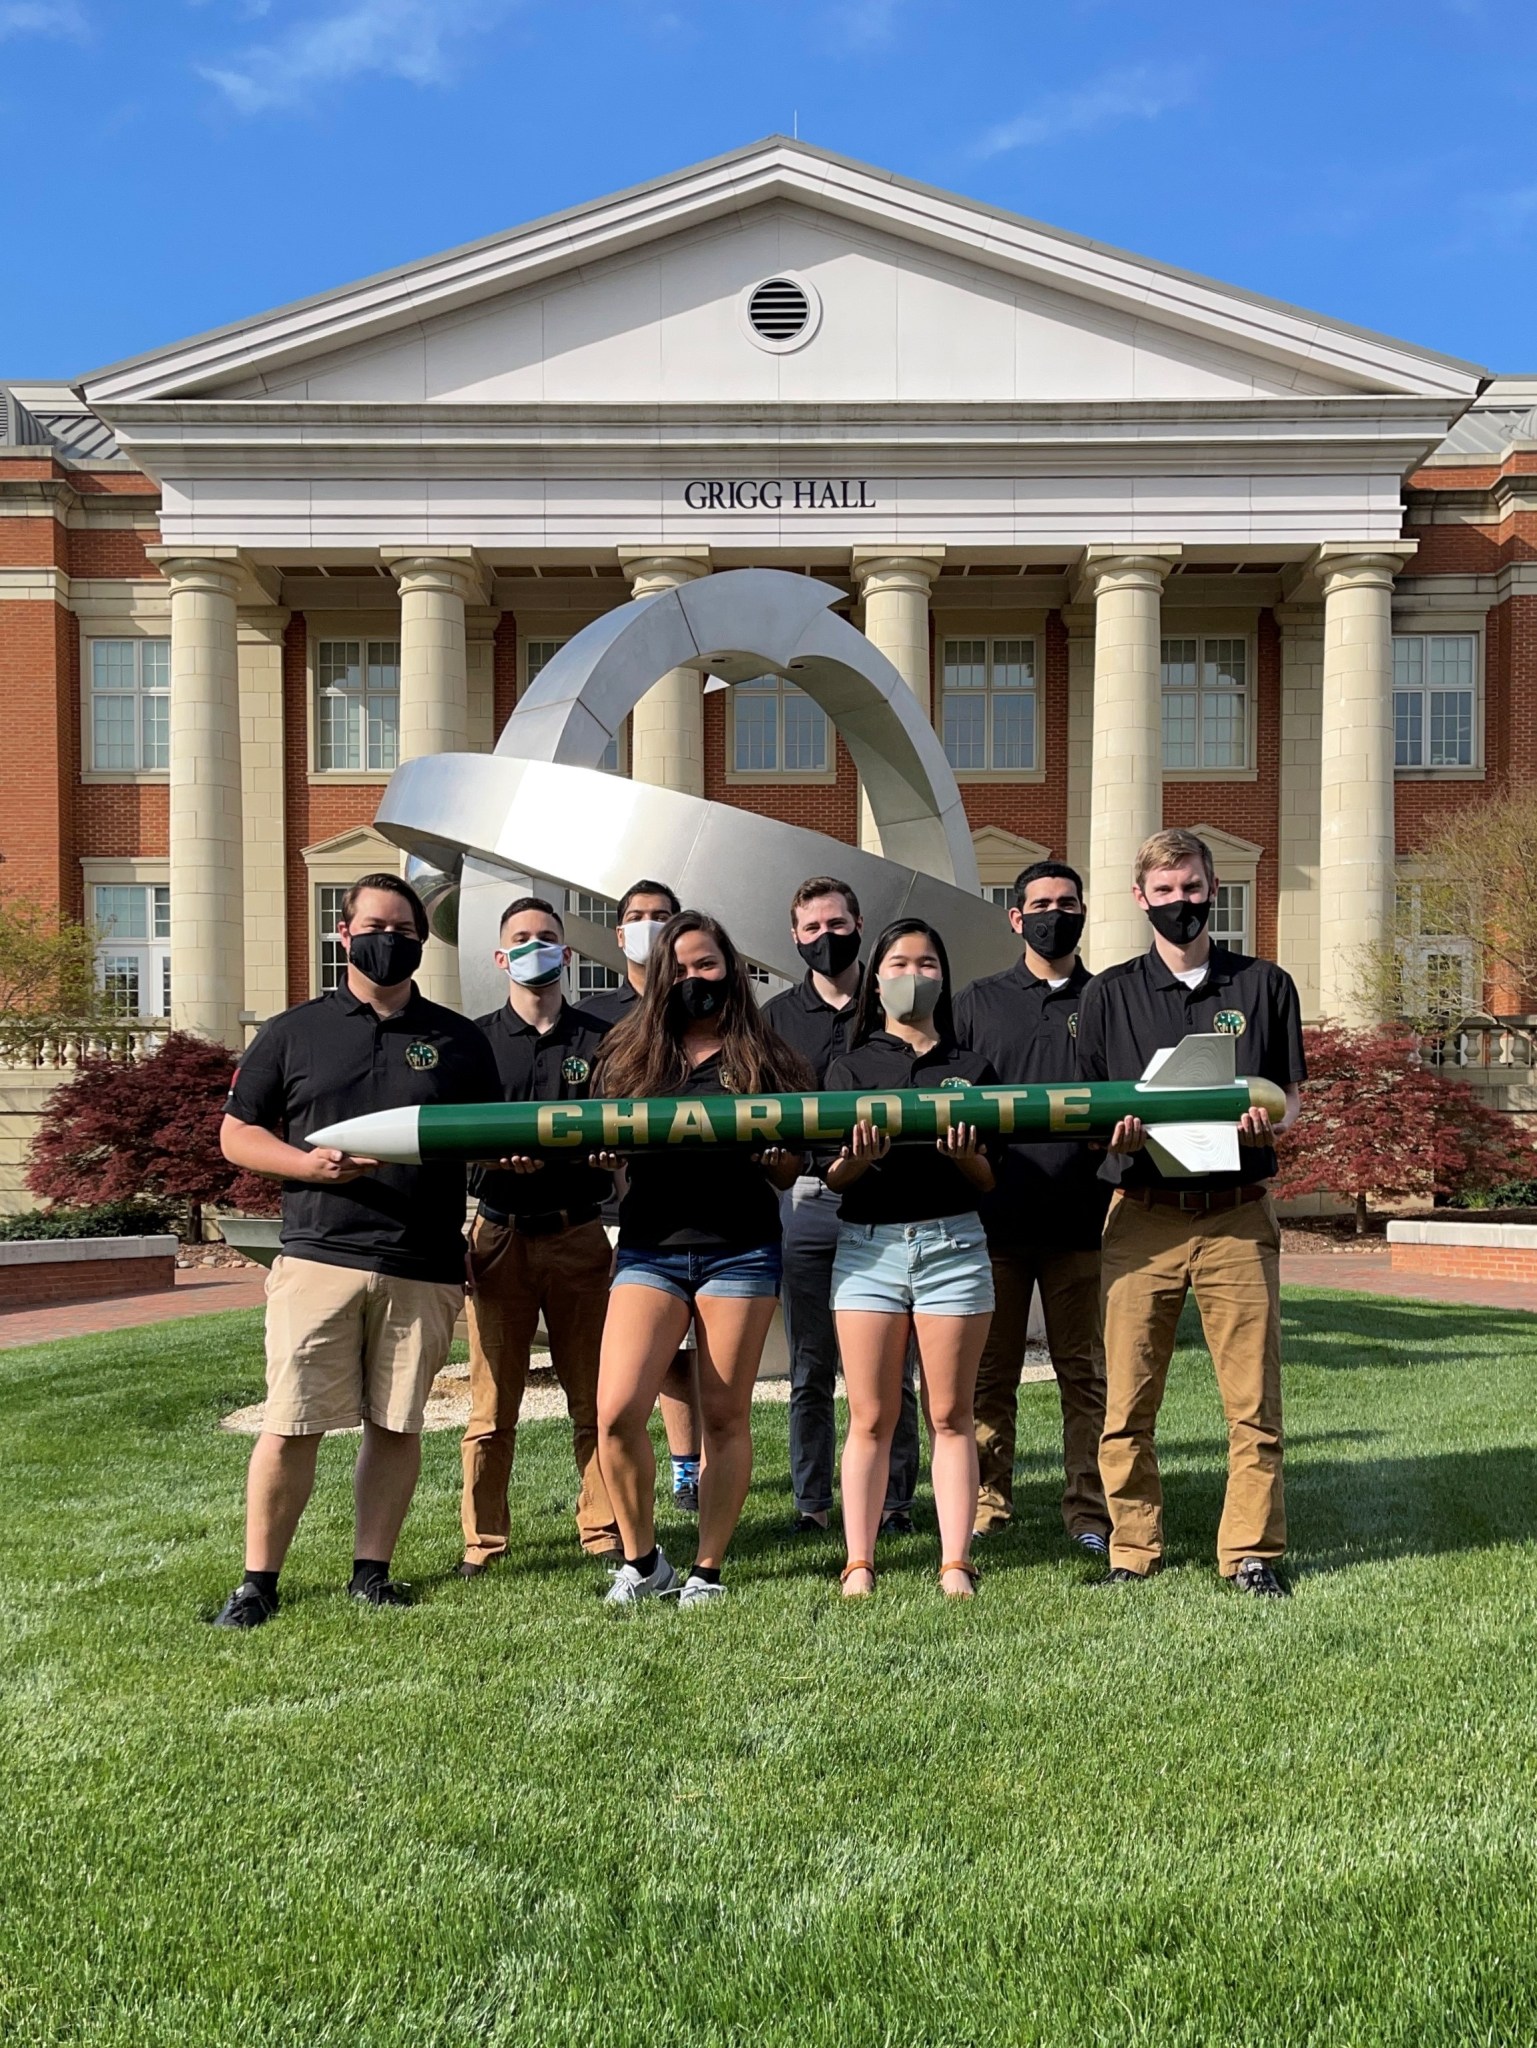 NASA announces University of North Carolina at Charlotte as the winner of the Launch Division in the 2021 Student Launch competition. 